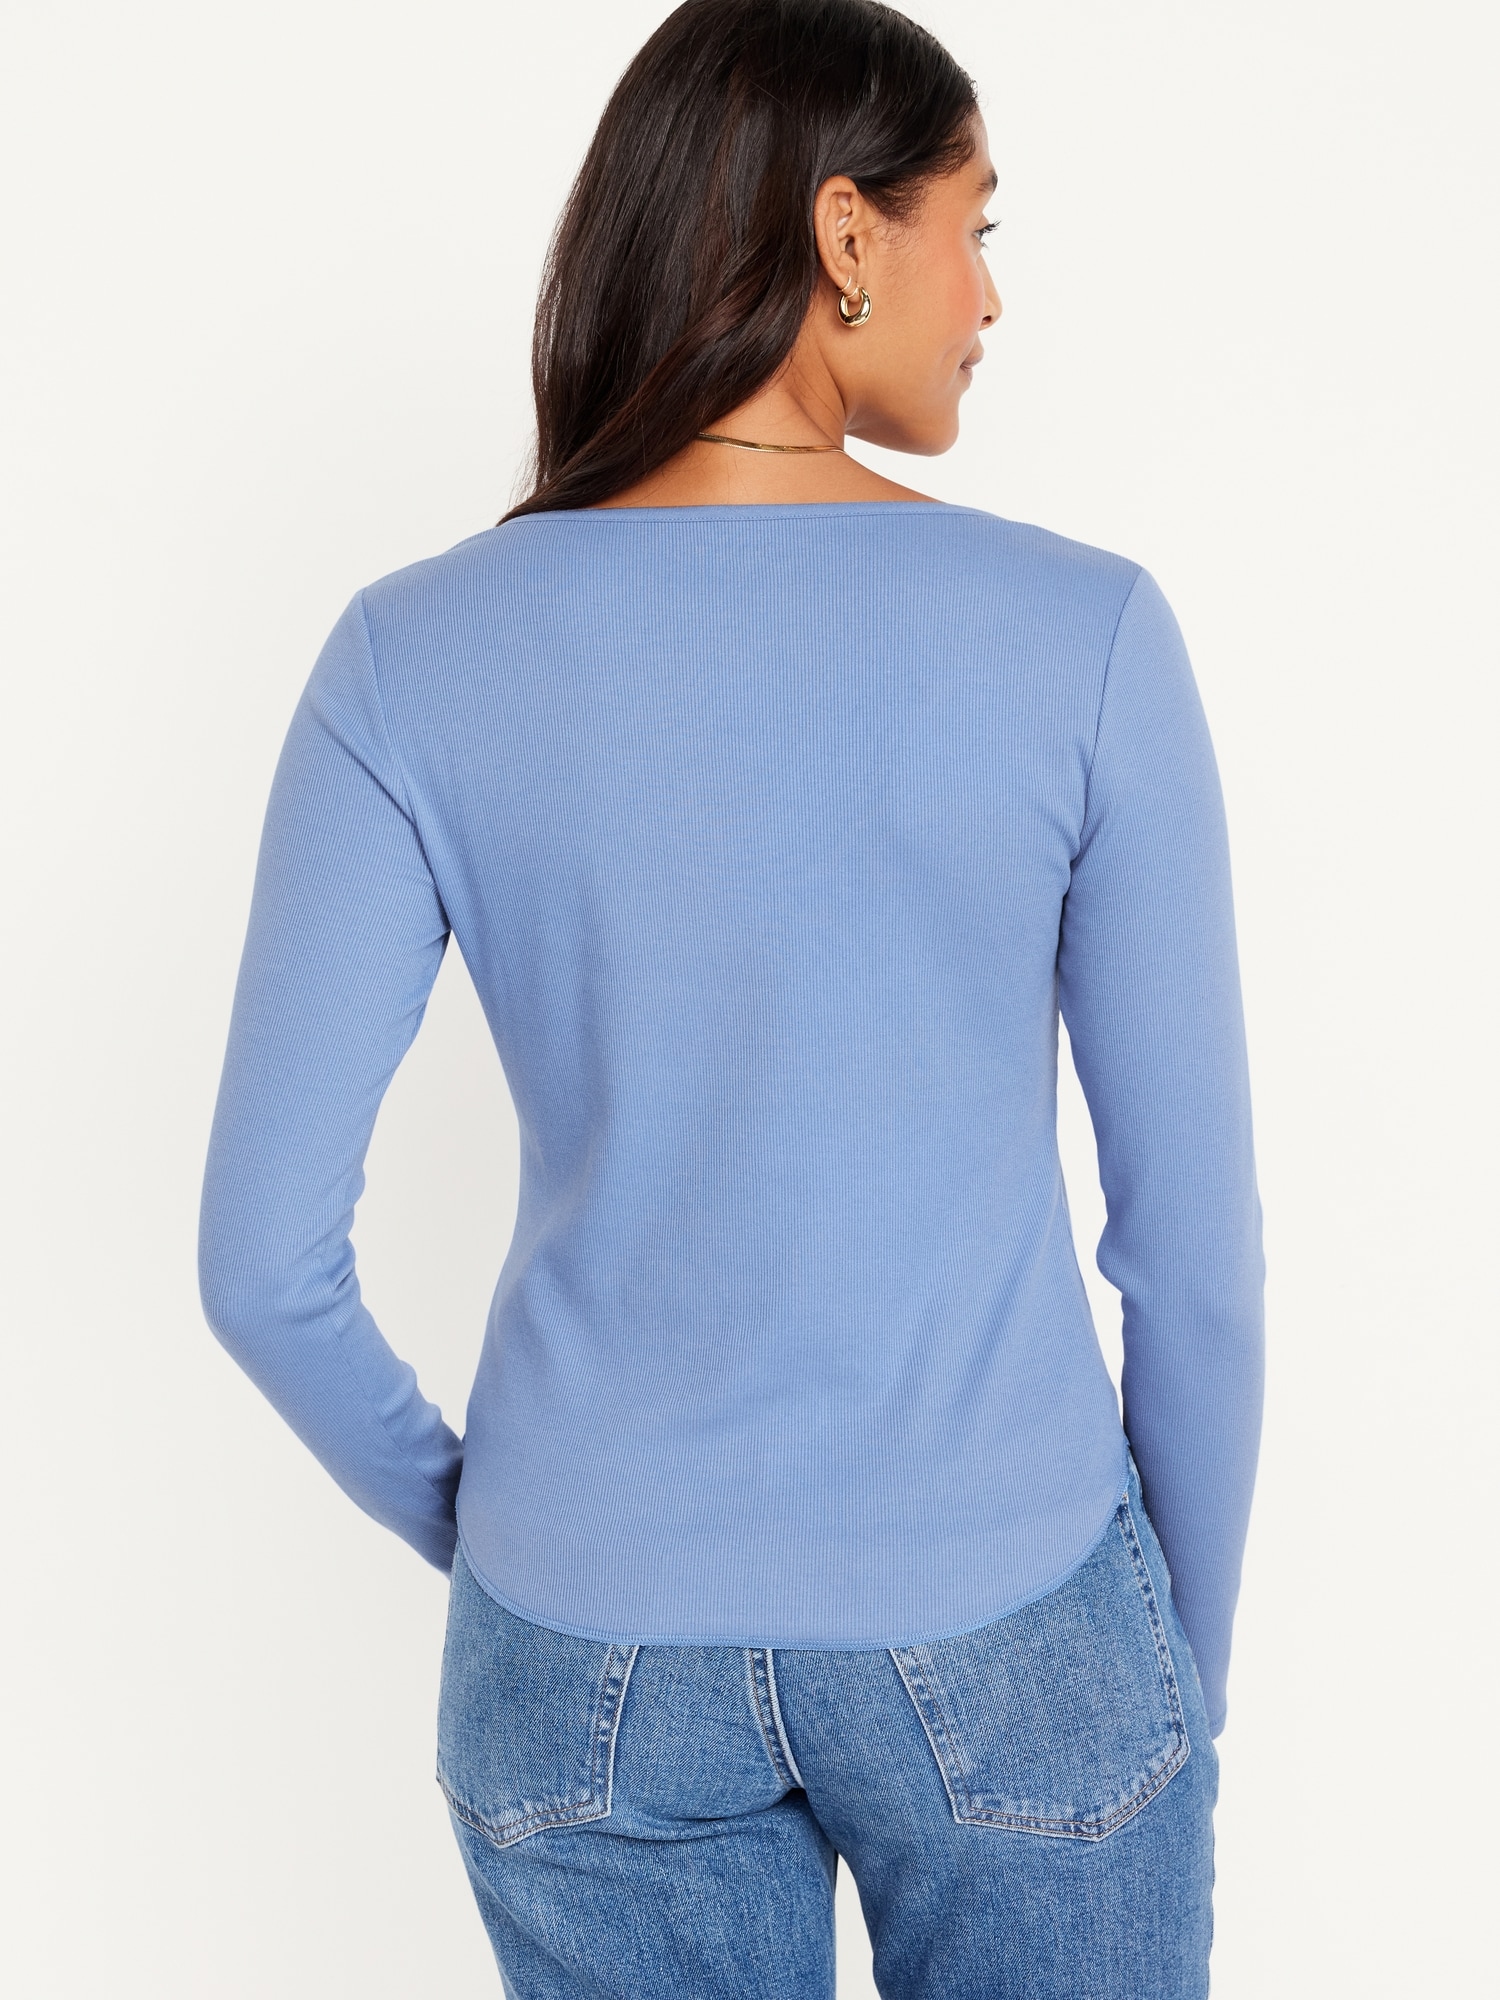 Navy Long-Sleeve Old for | Women T-Shirt Fitted Rib-Knit